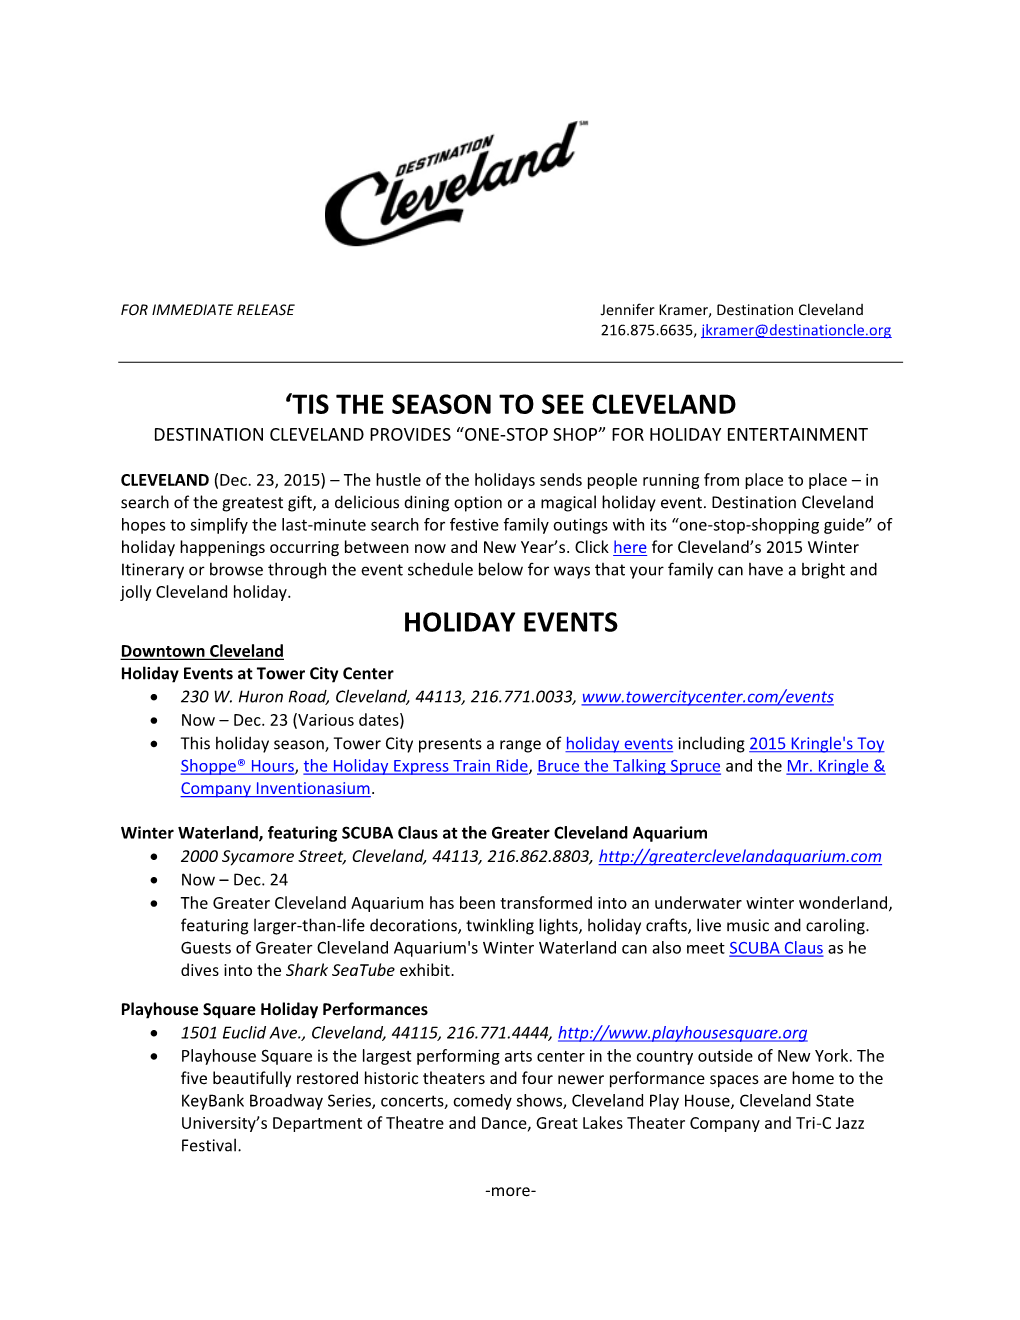 'Tis the Season to See Cleveland Holiday Events